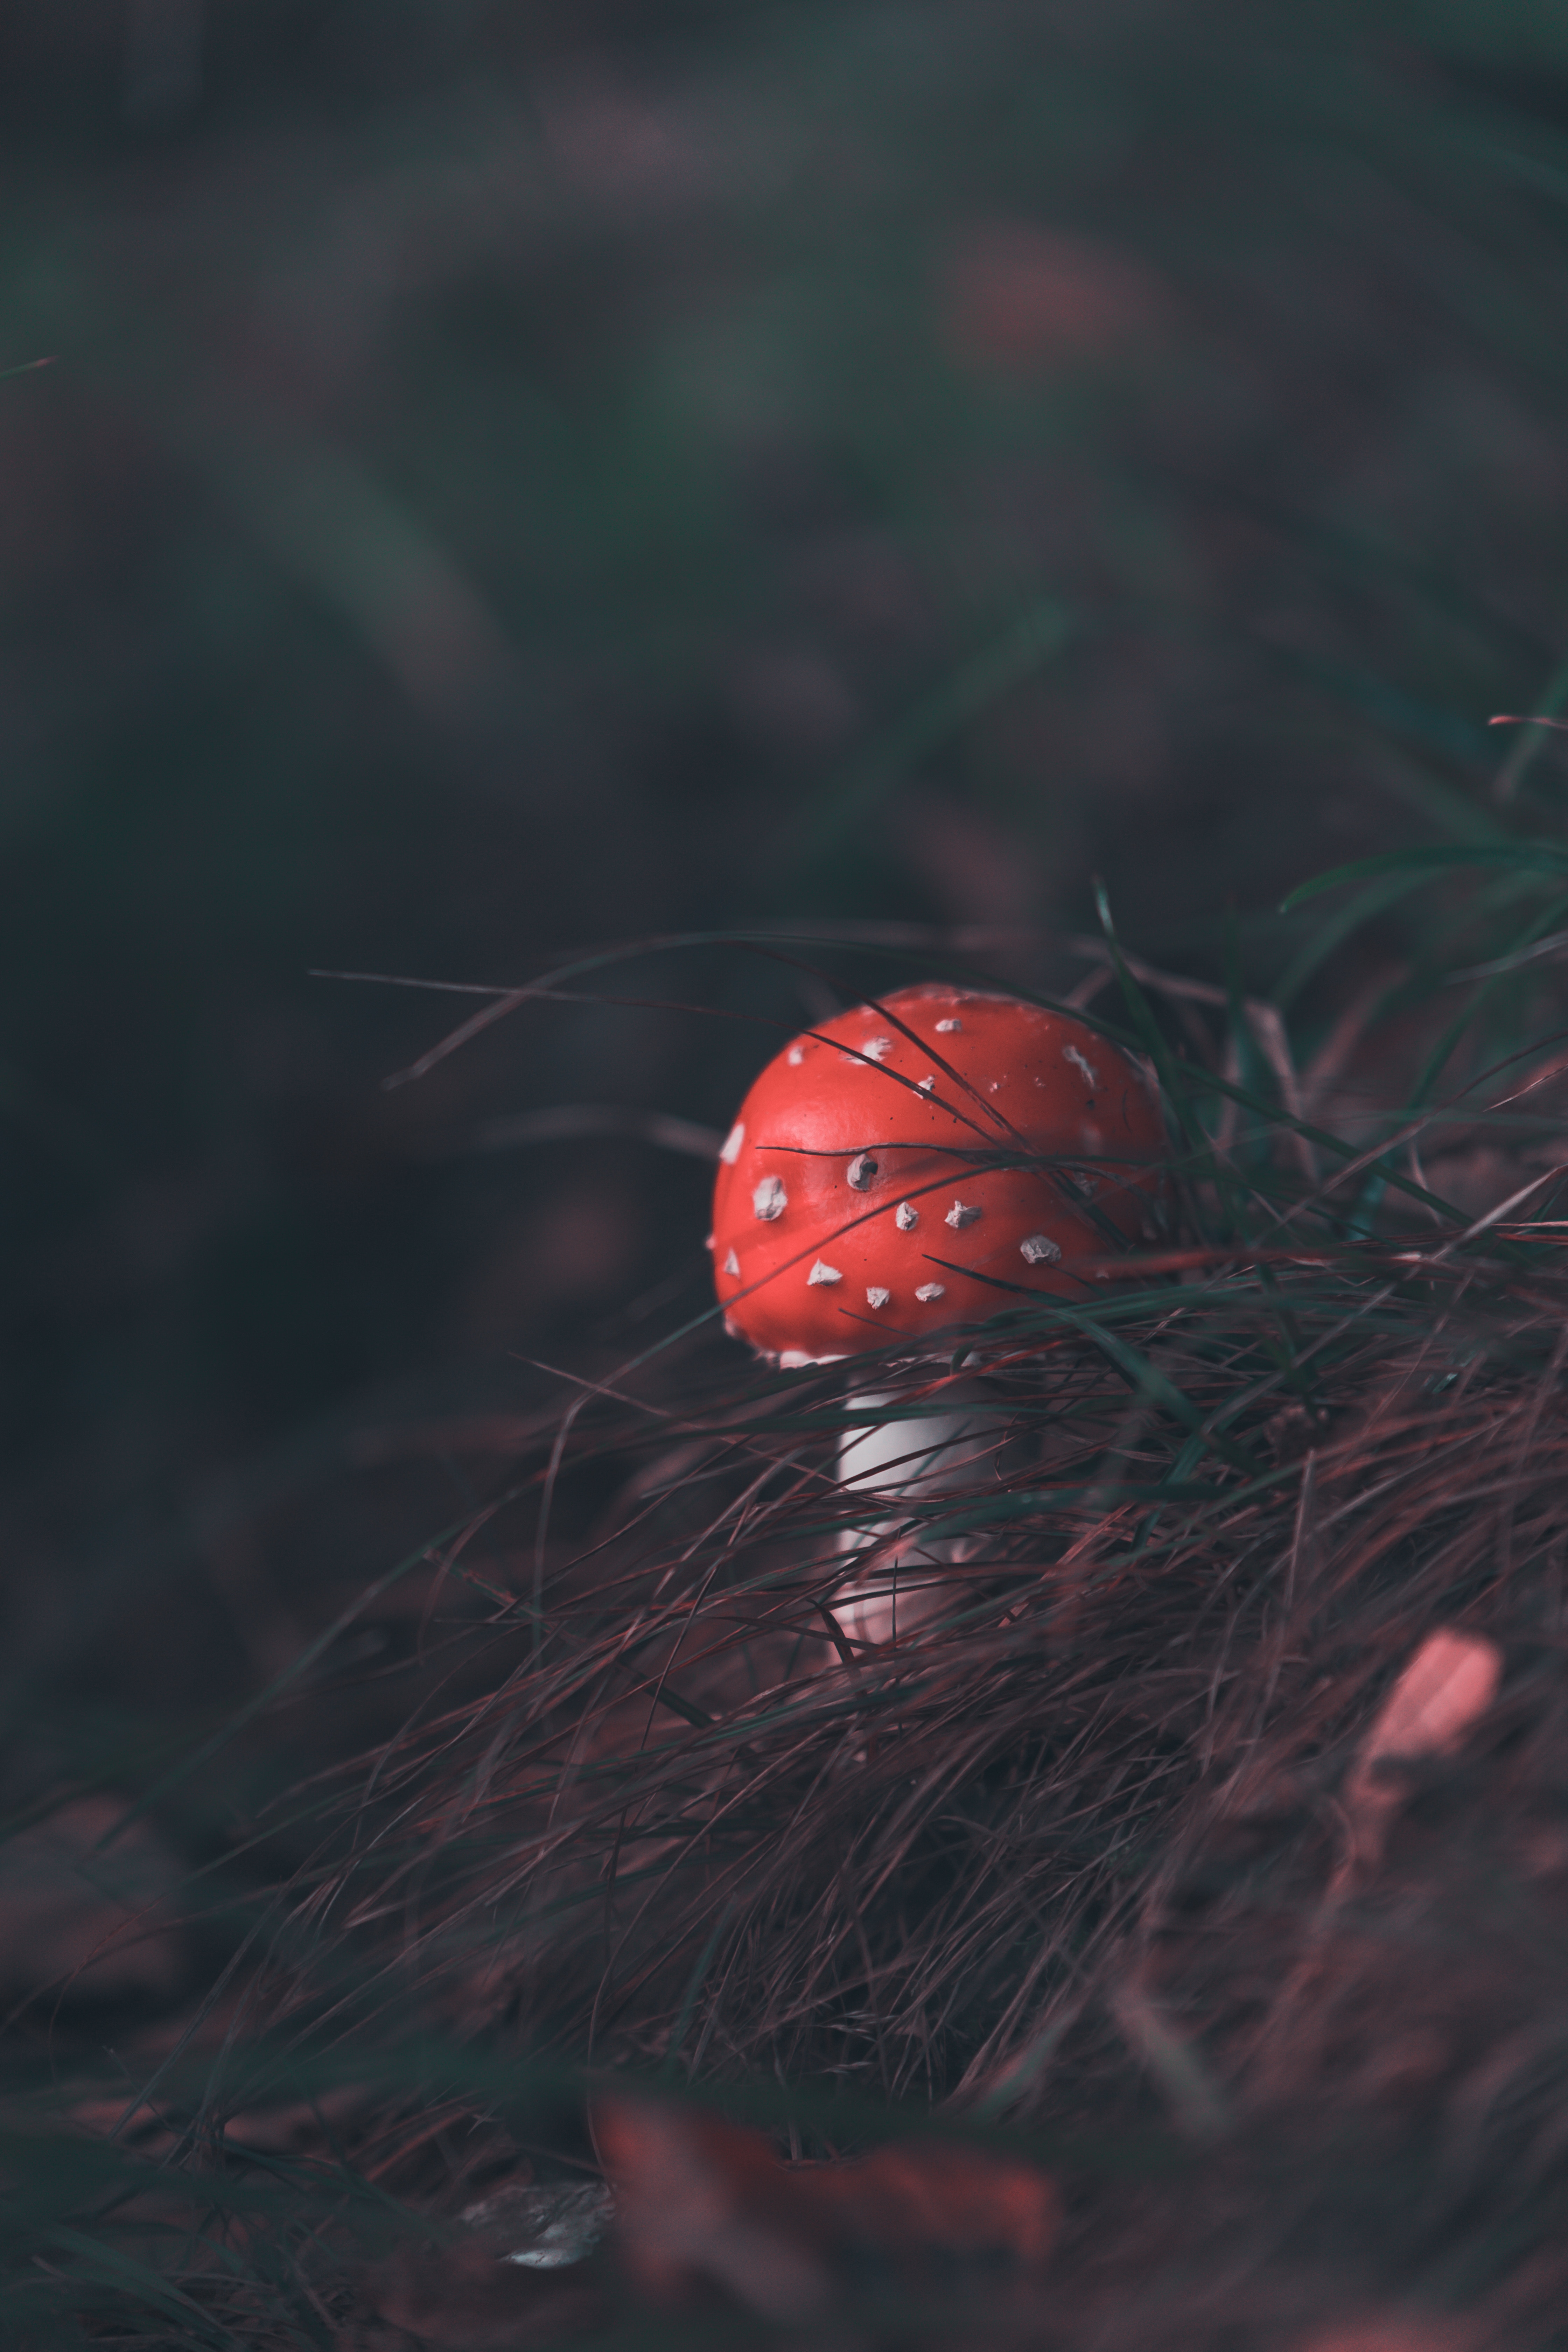 android mushroom, smooth, nature, grass, blur, fly agaric